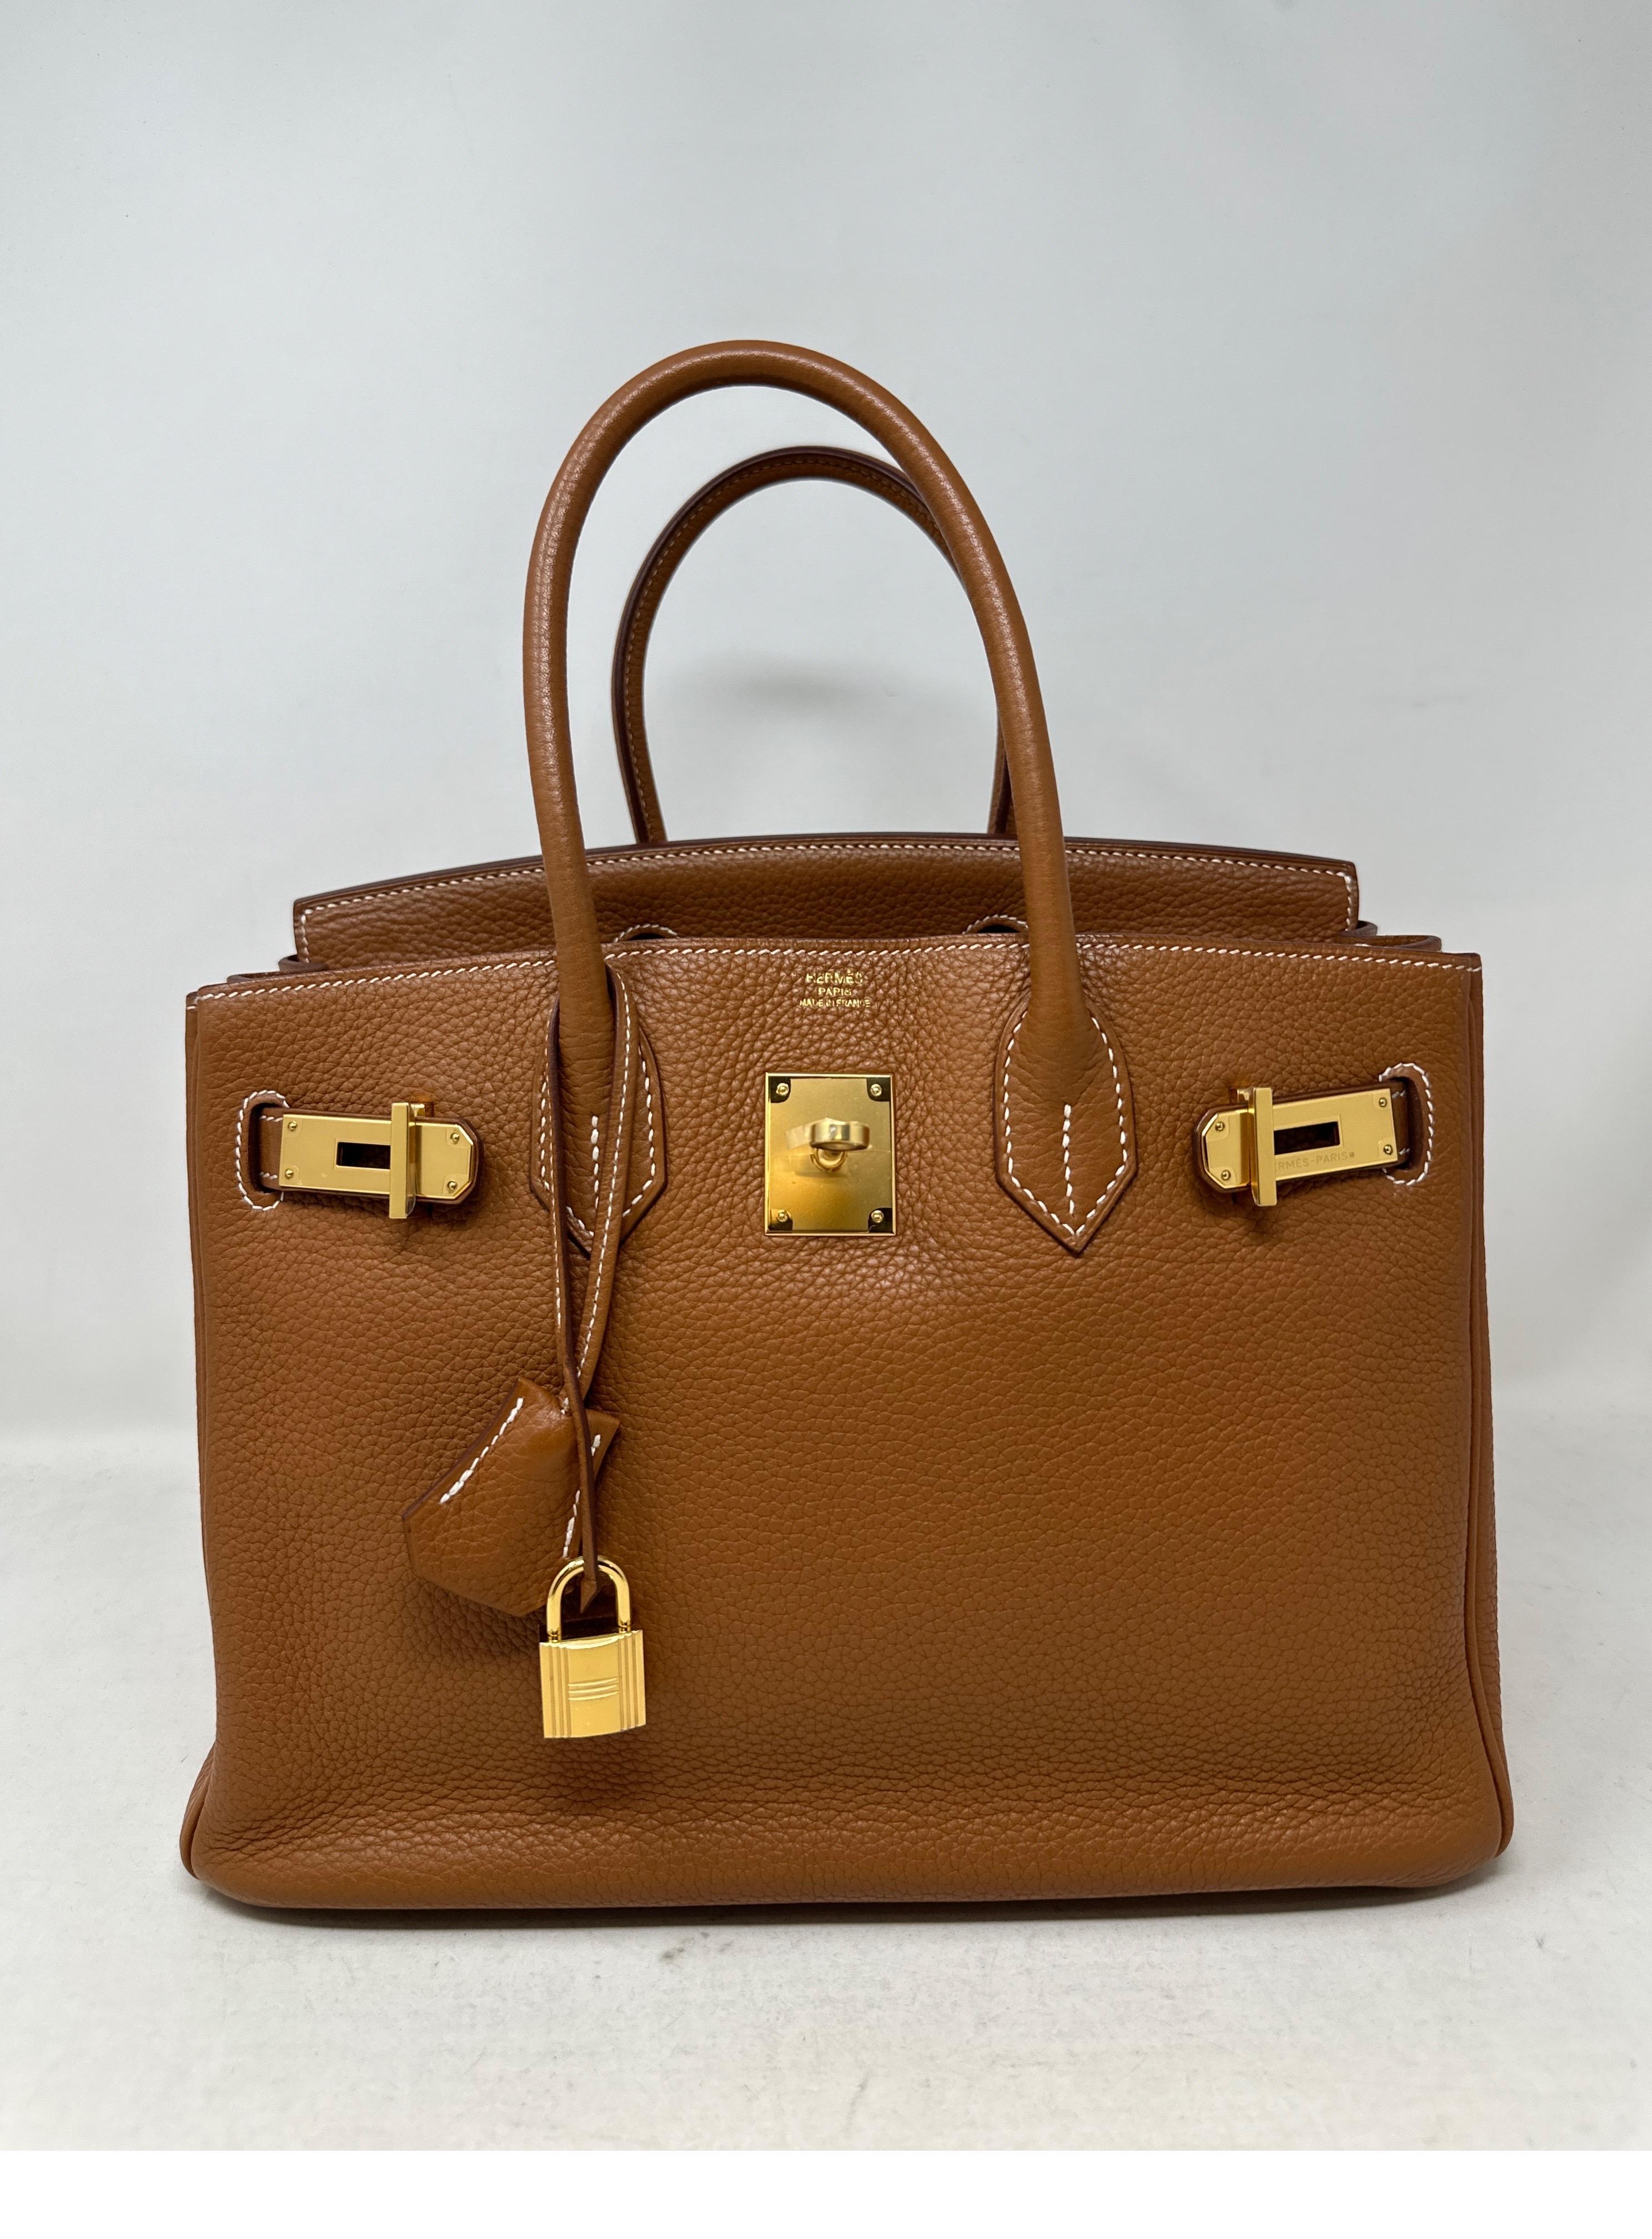 Hermes Gold Birkin 30 Bag. Gold togo leather with gold hardware. Good condition. Has one light spot behind one handle. Interior is clean. Includes clochette, lock, keys, and dust bag. Guaranteed authentic. 